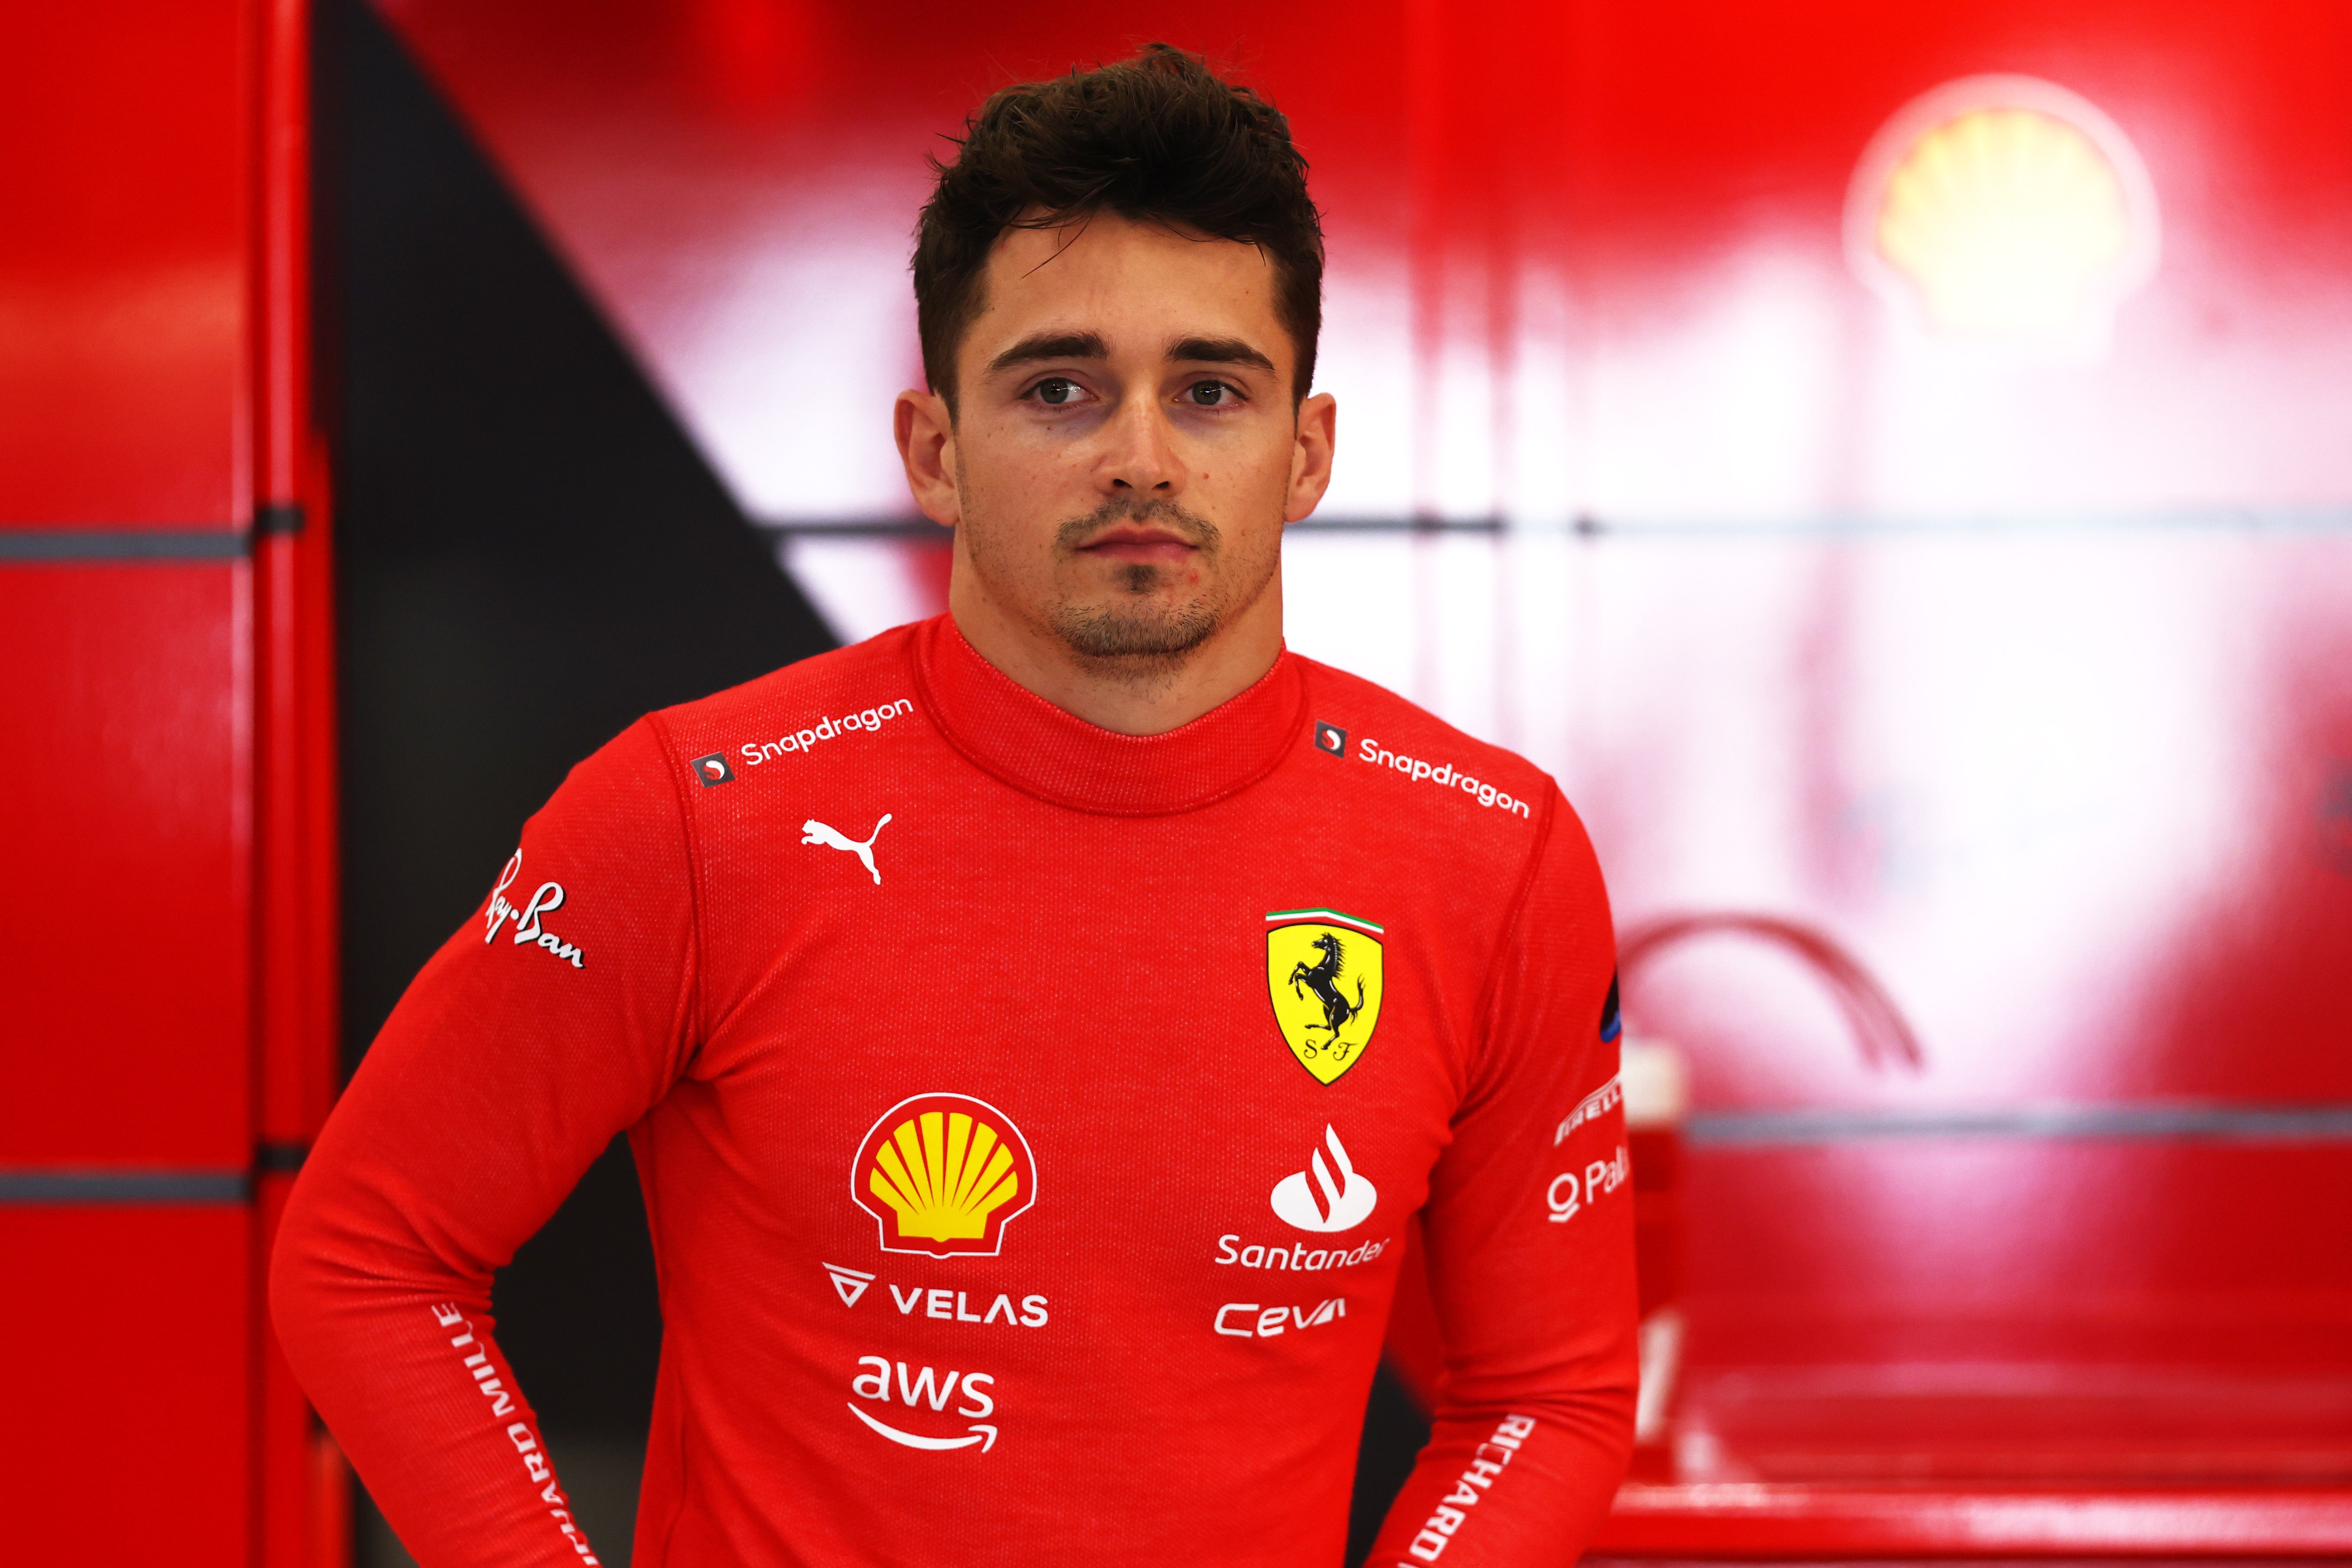 Charles Leclerc has finished first and second in the first two races of the 2022 F1 season.